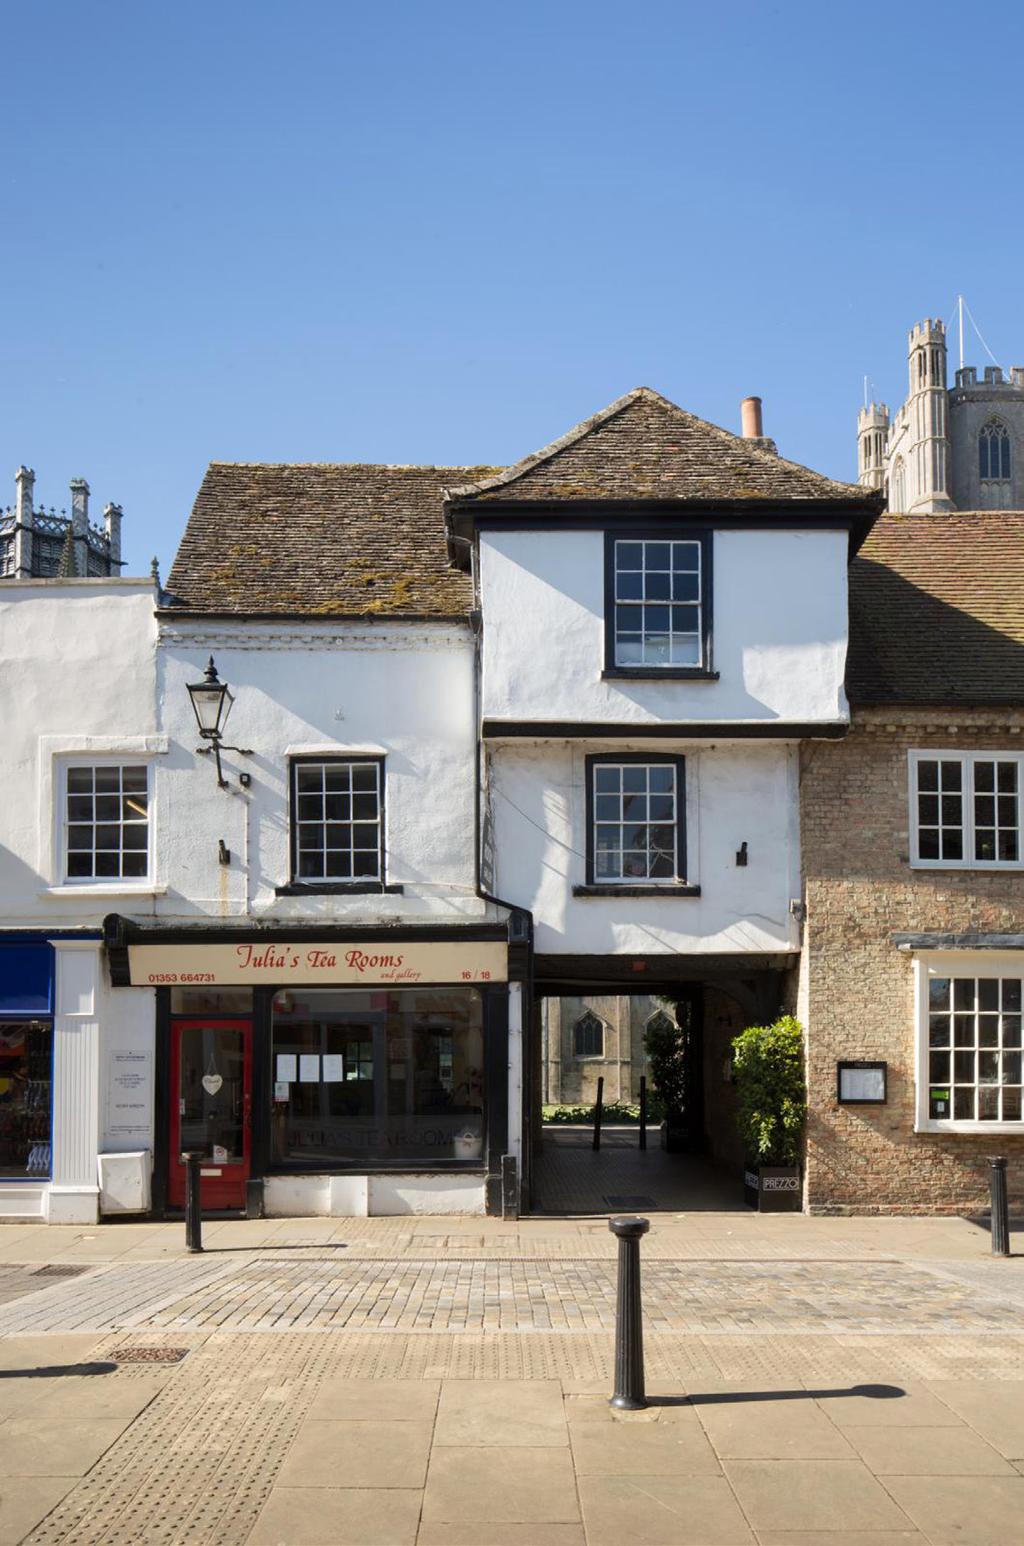 STEEPLEGATE, 16 AND 18 HIGH STREET, ELY As part of the Early Fabric in Historic Towns: Ely project the basement of 16 High Street, currently the premises of Julia s Tea Rooms, was visited and